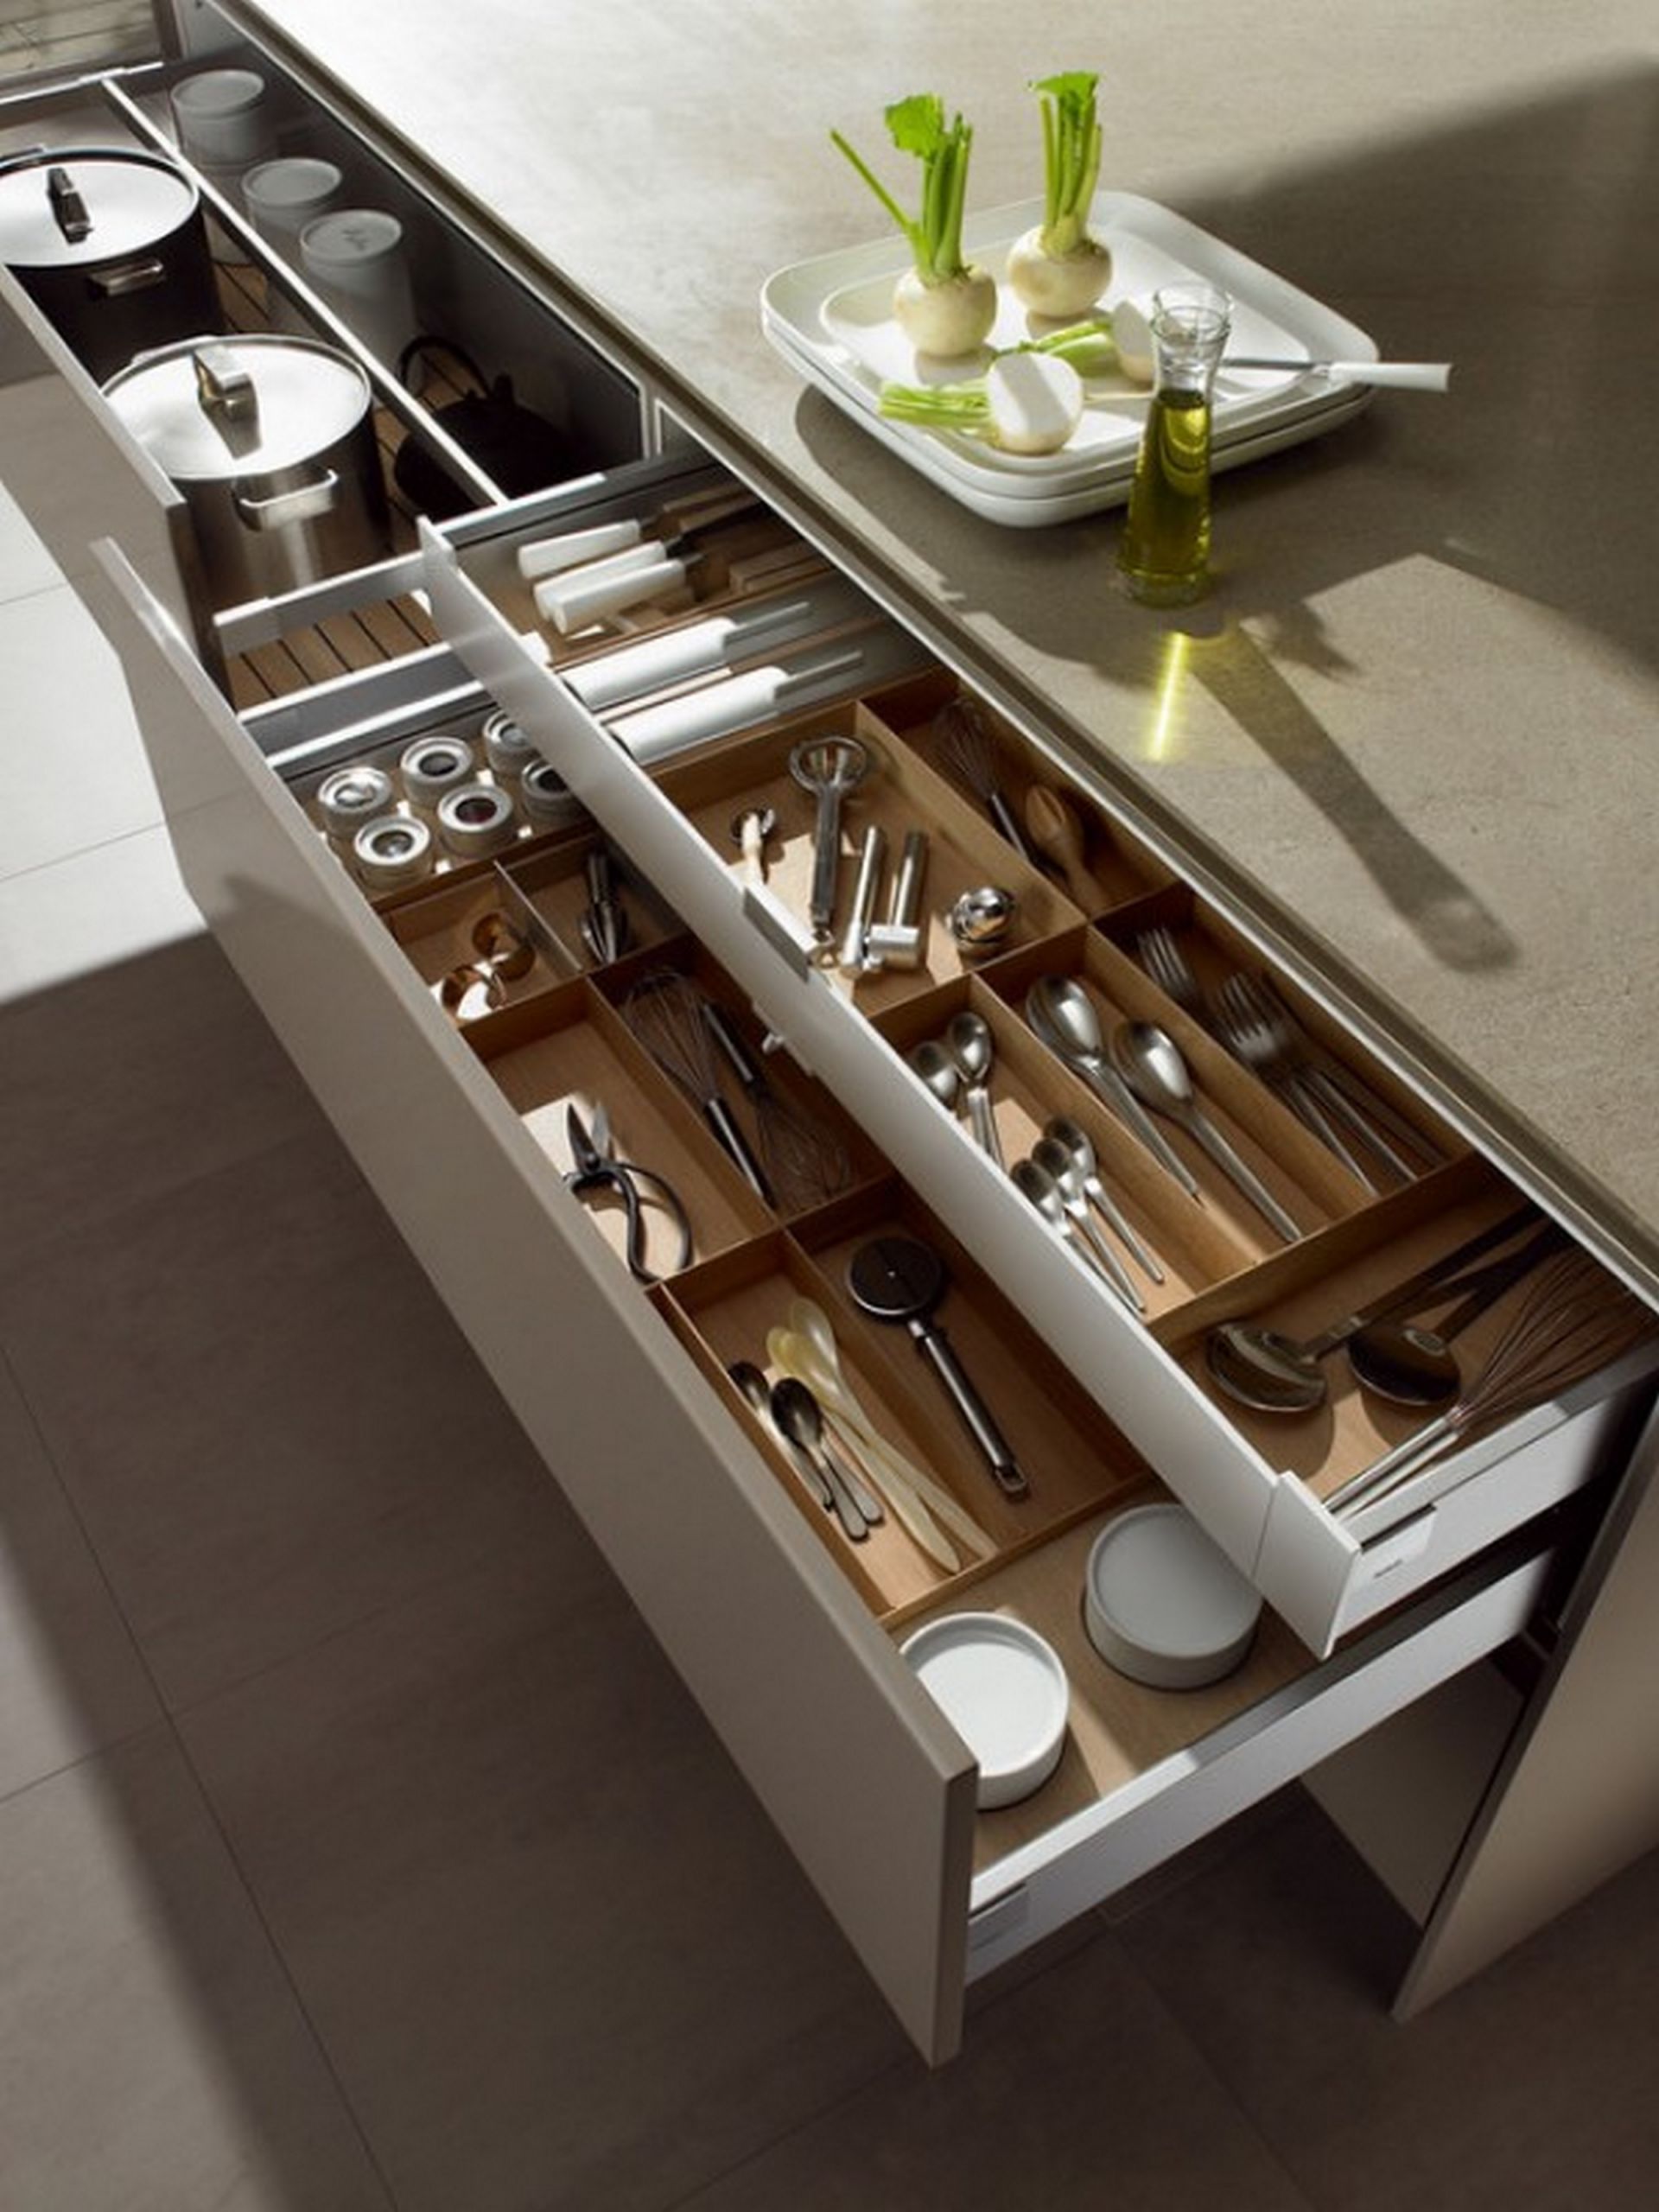 Kitchen Drawer Organizer
 Tips for Perfectly Organized Kitchen Drawers